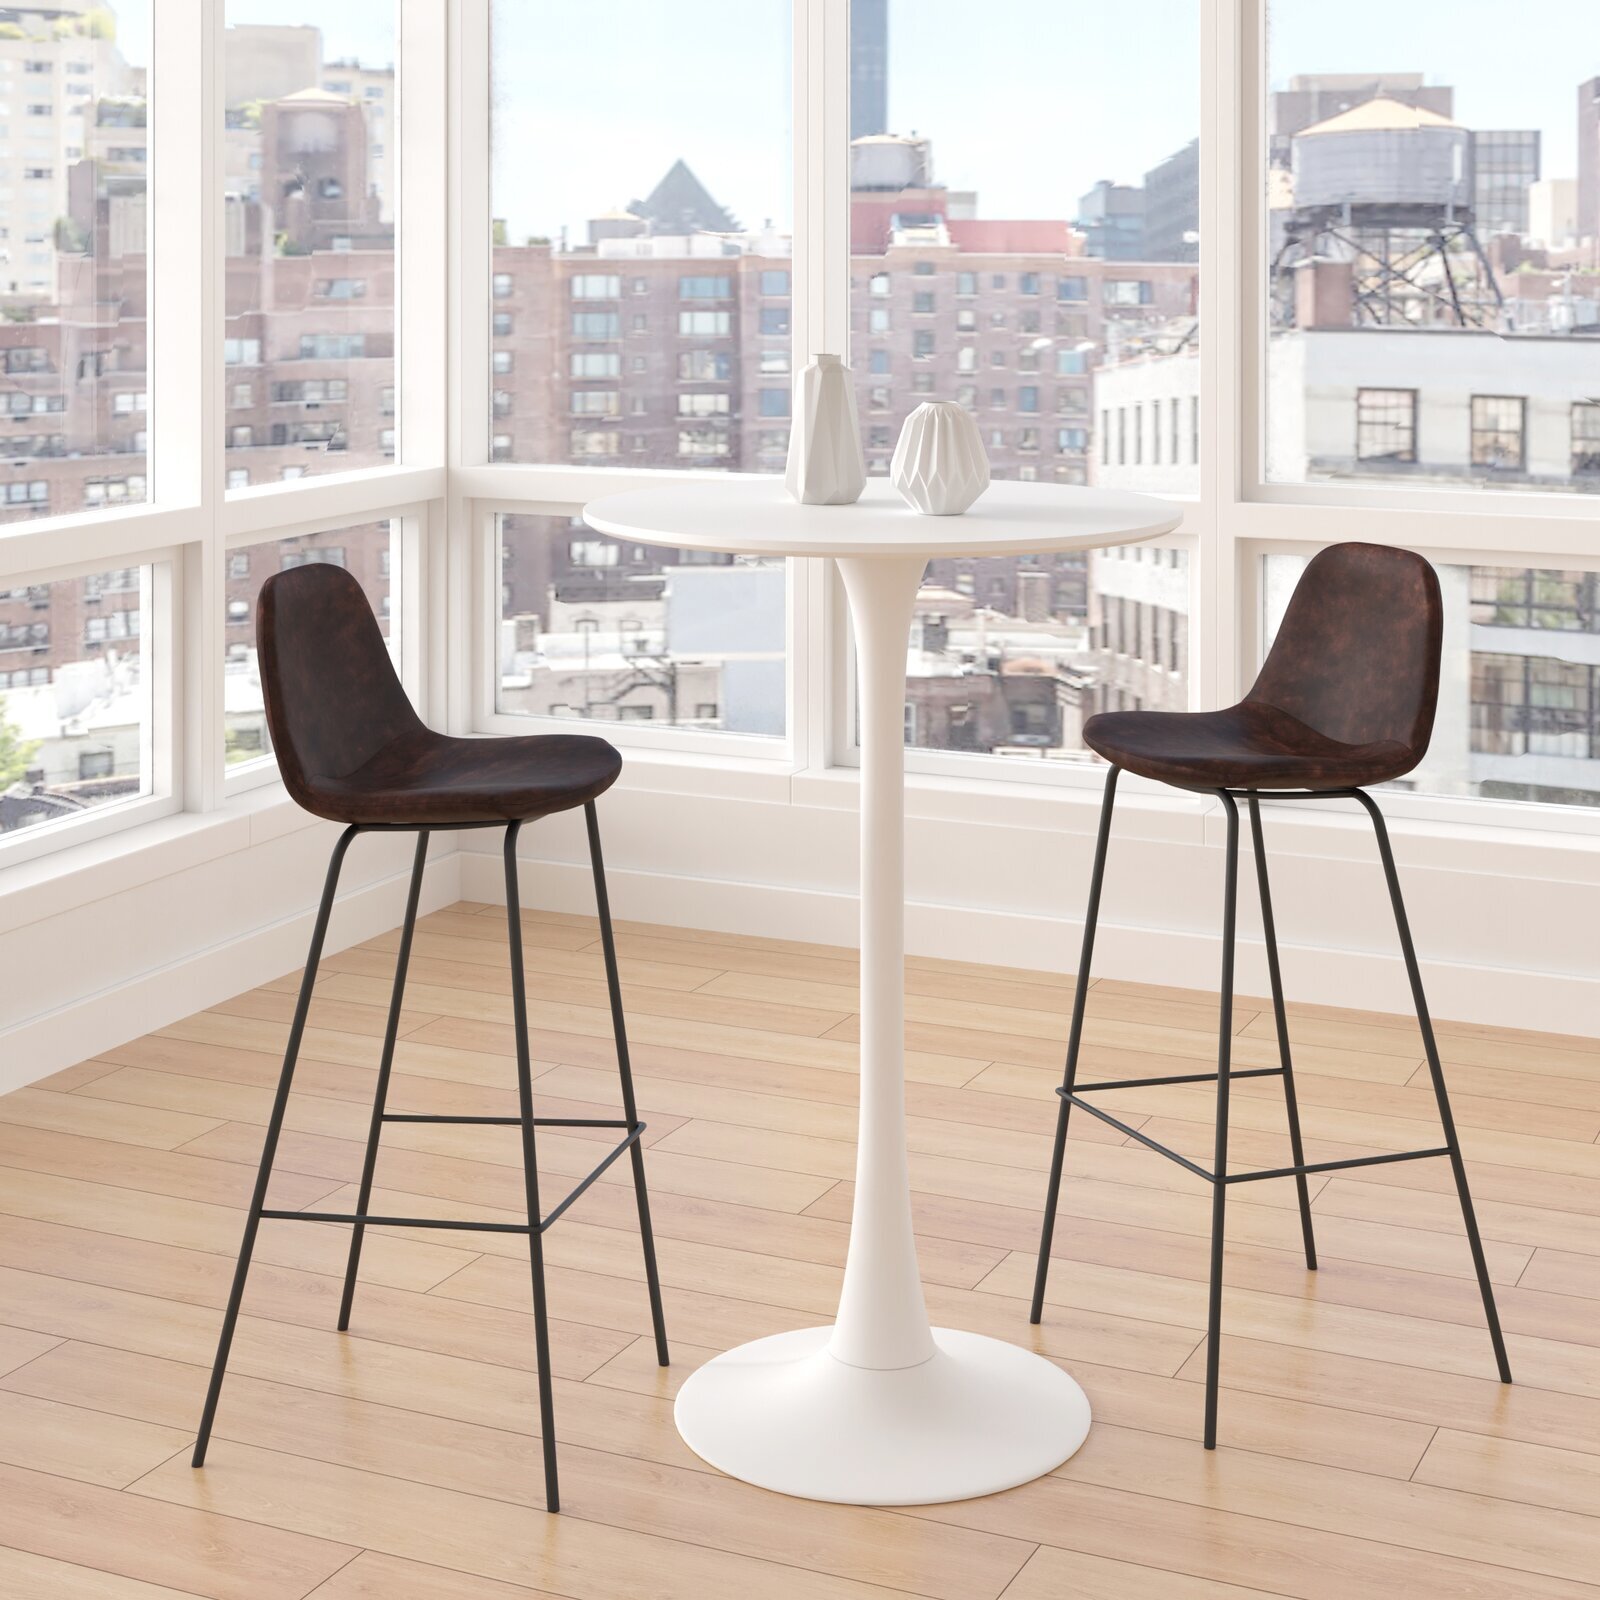 High end Bar Stools With Lower Back Support